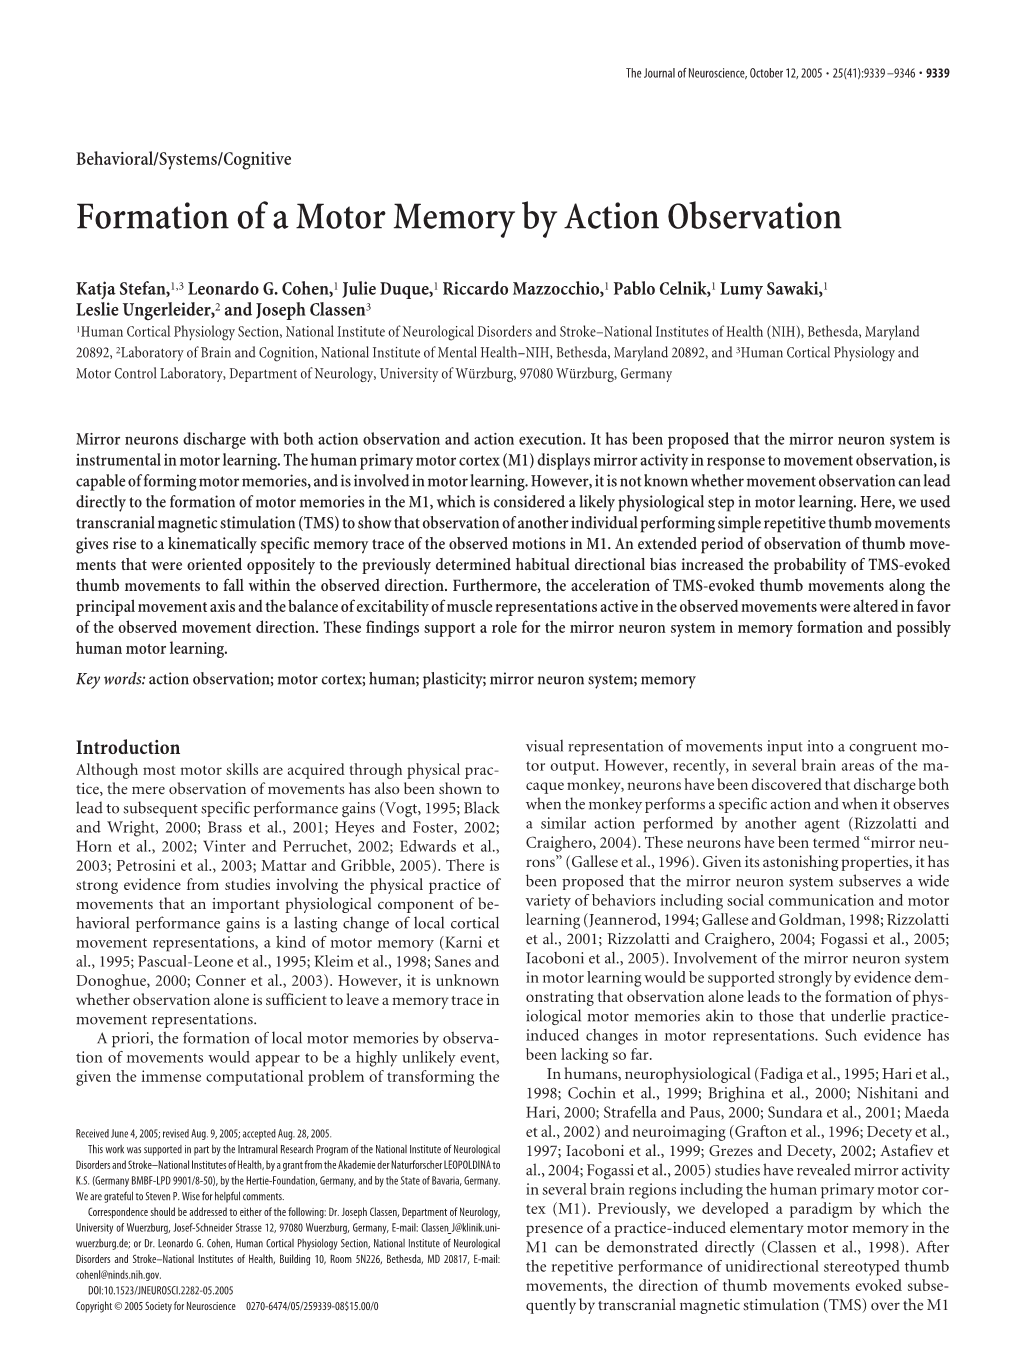 Formation of a Motor Memory by Action Observation